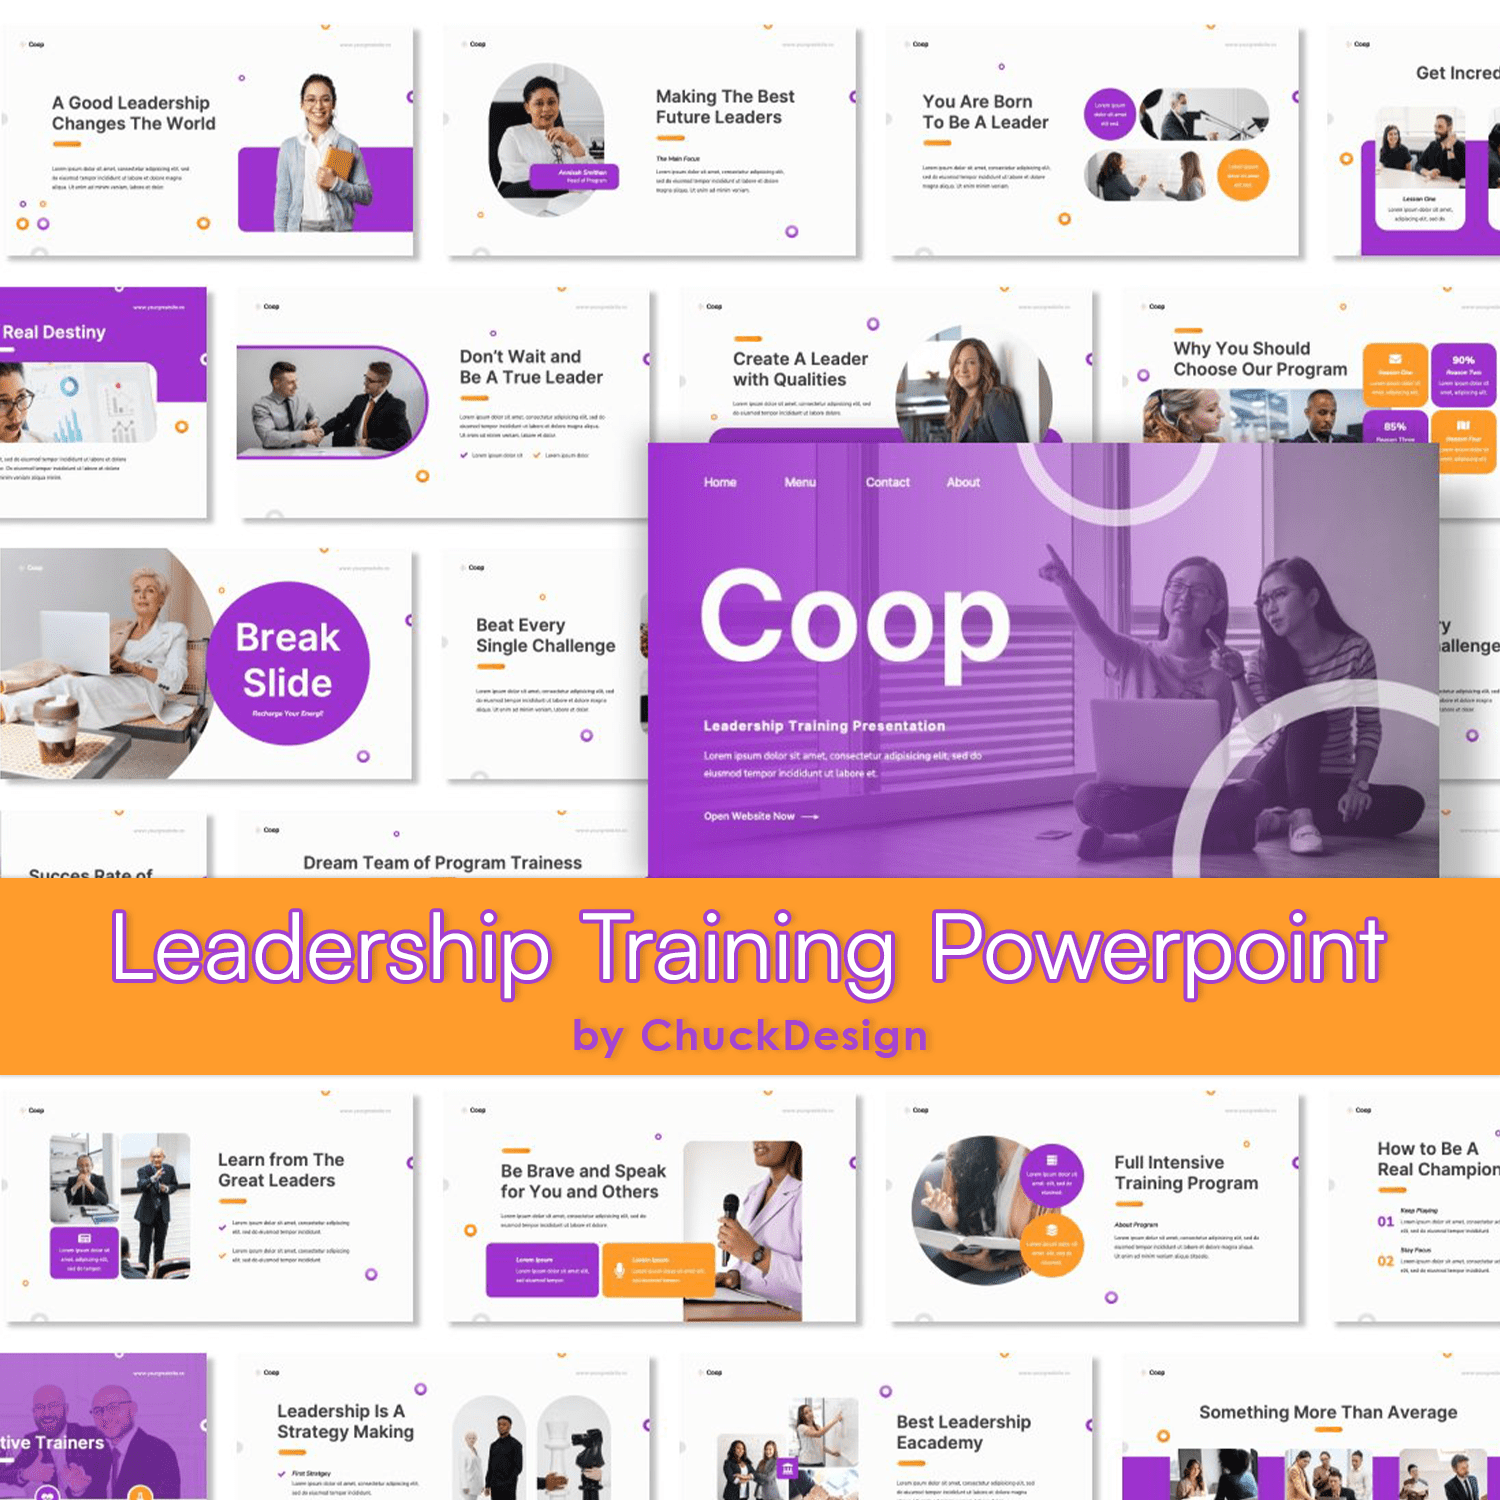 Leadership Training PowerPoint cover image.